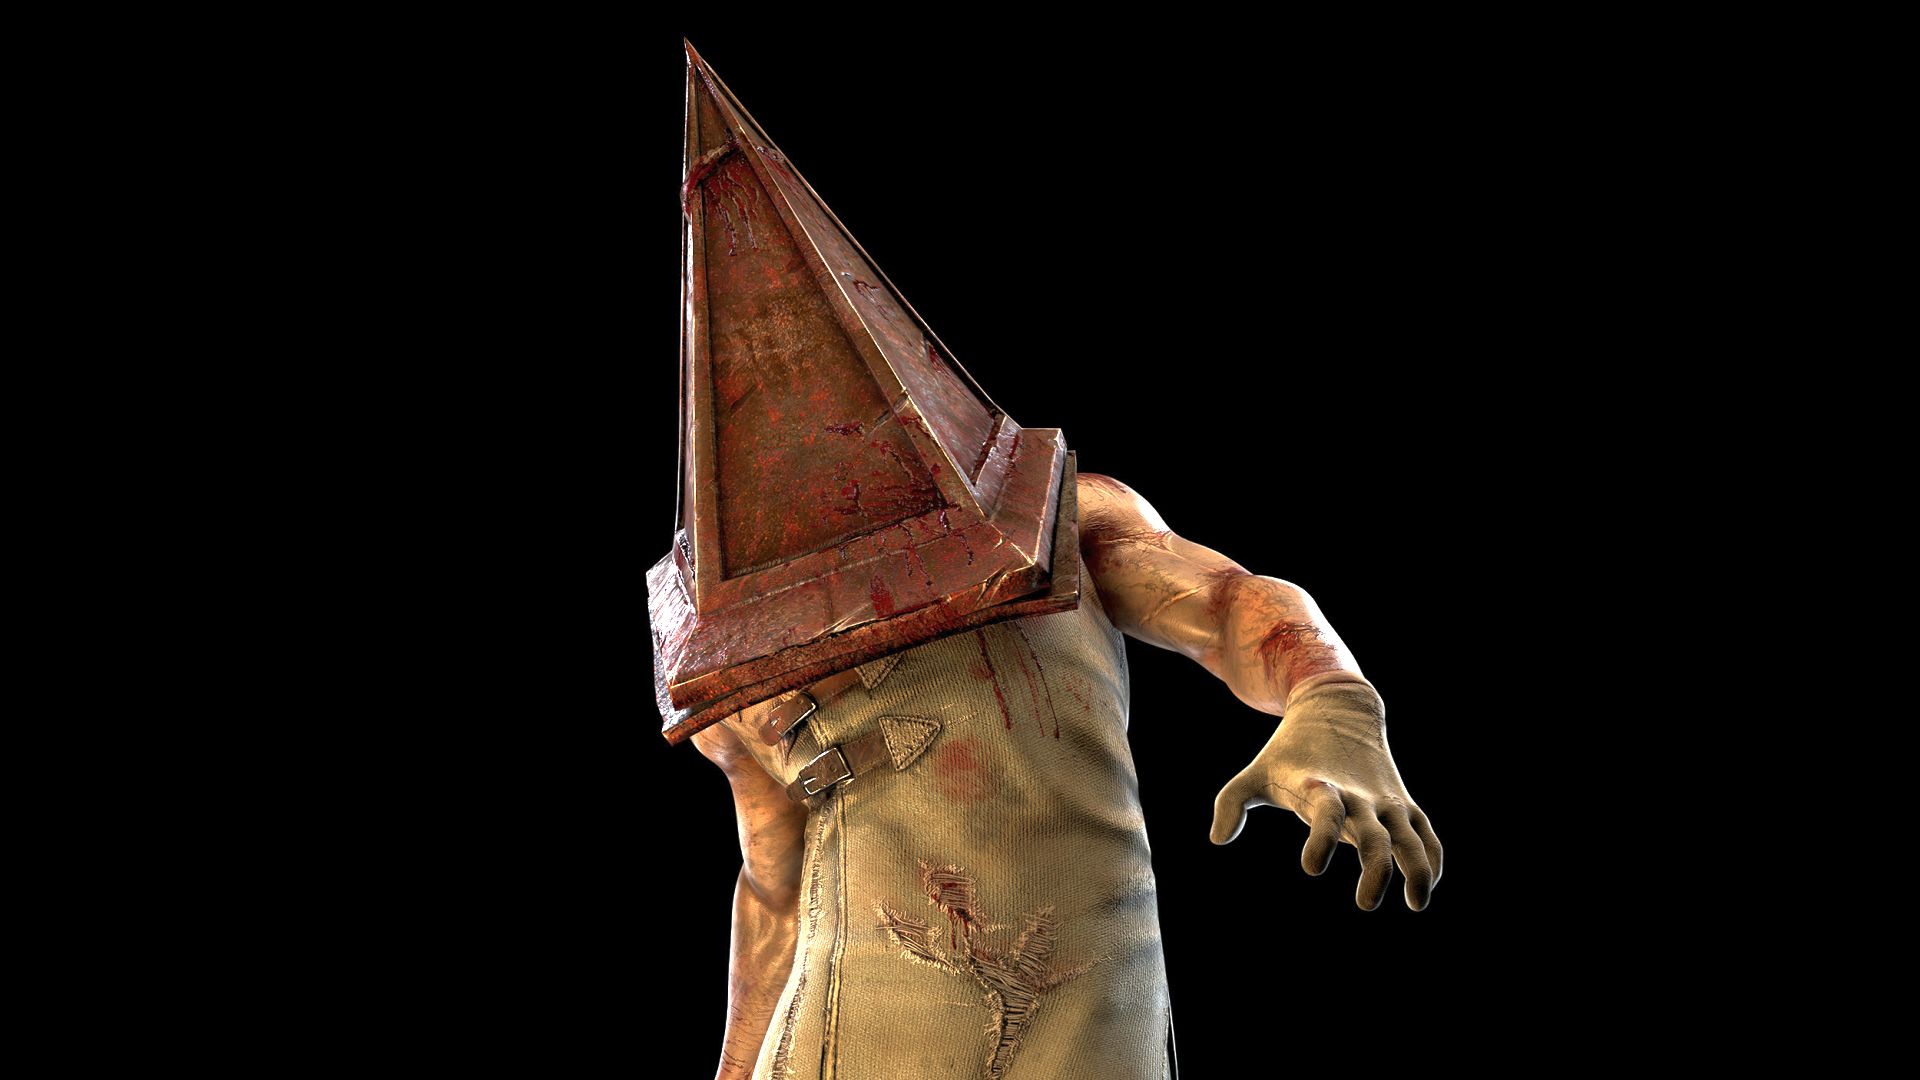 Dead by Daylight x Silent Hill - Pyramid Head Gameplay 